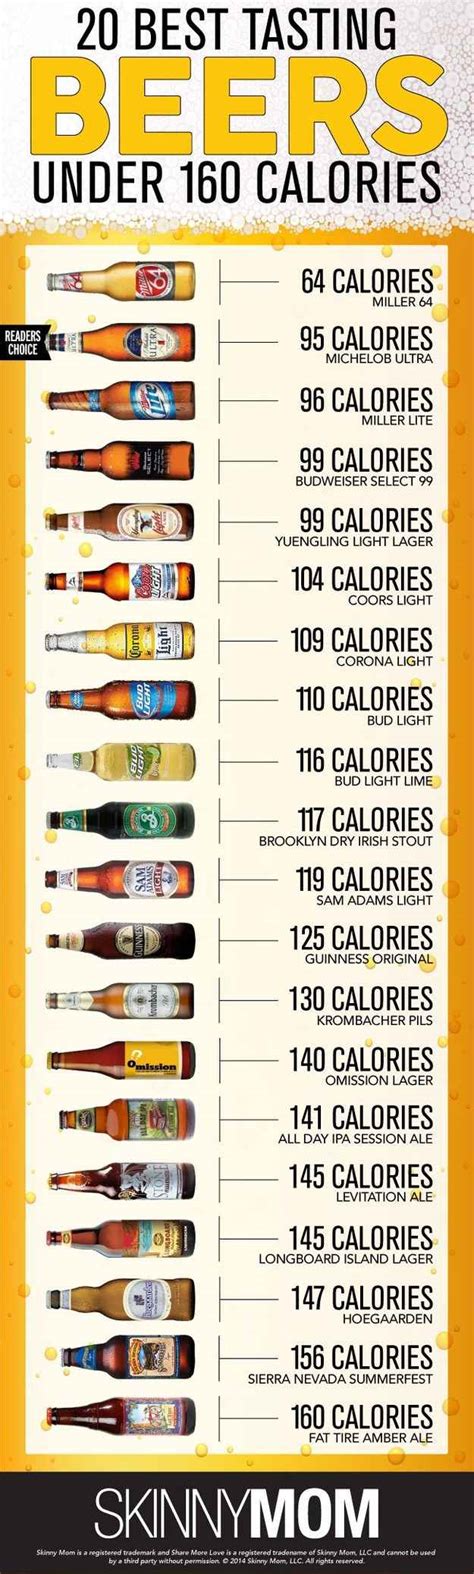 Calories By Beer Type